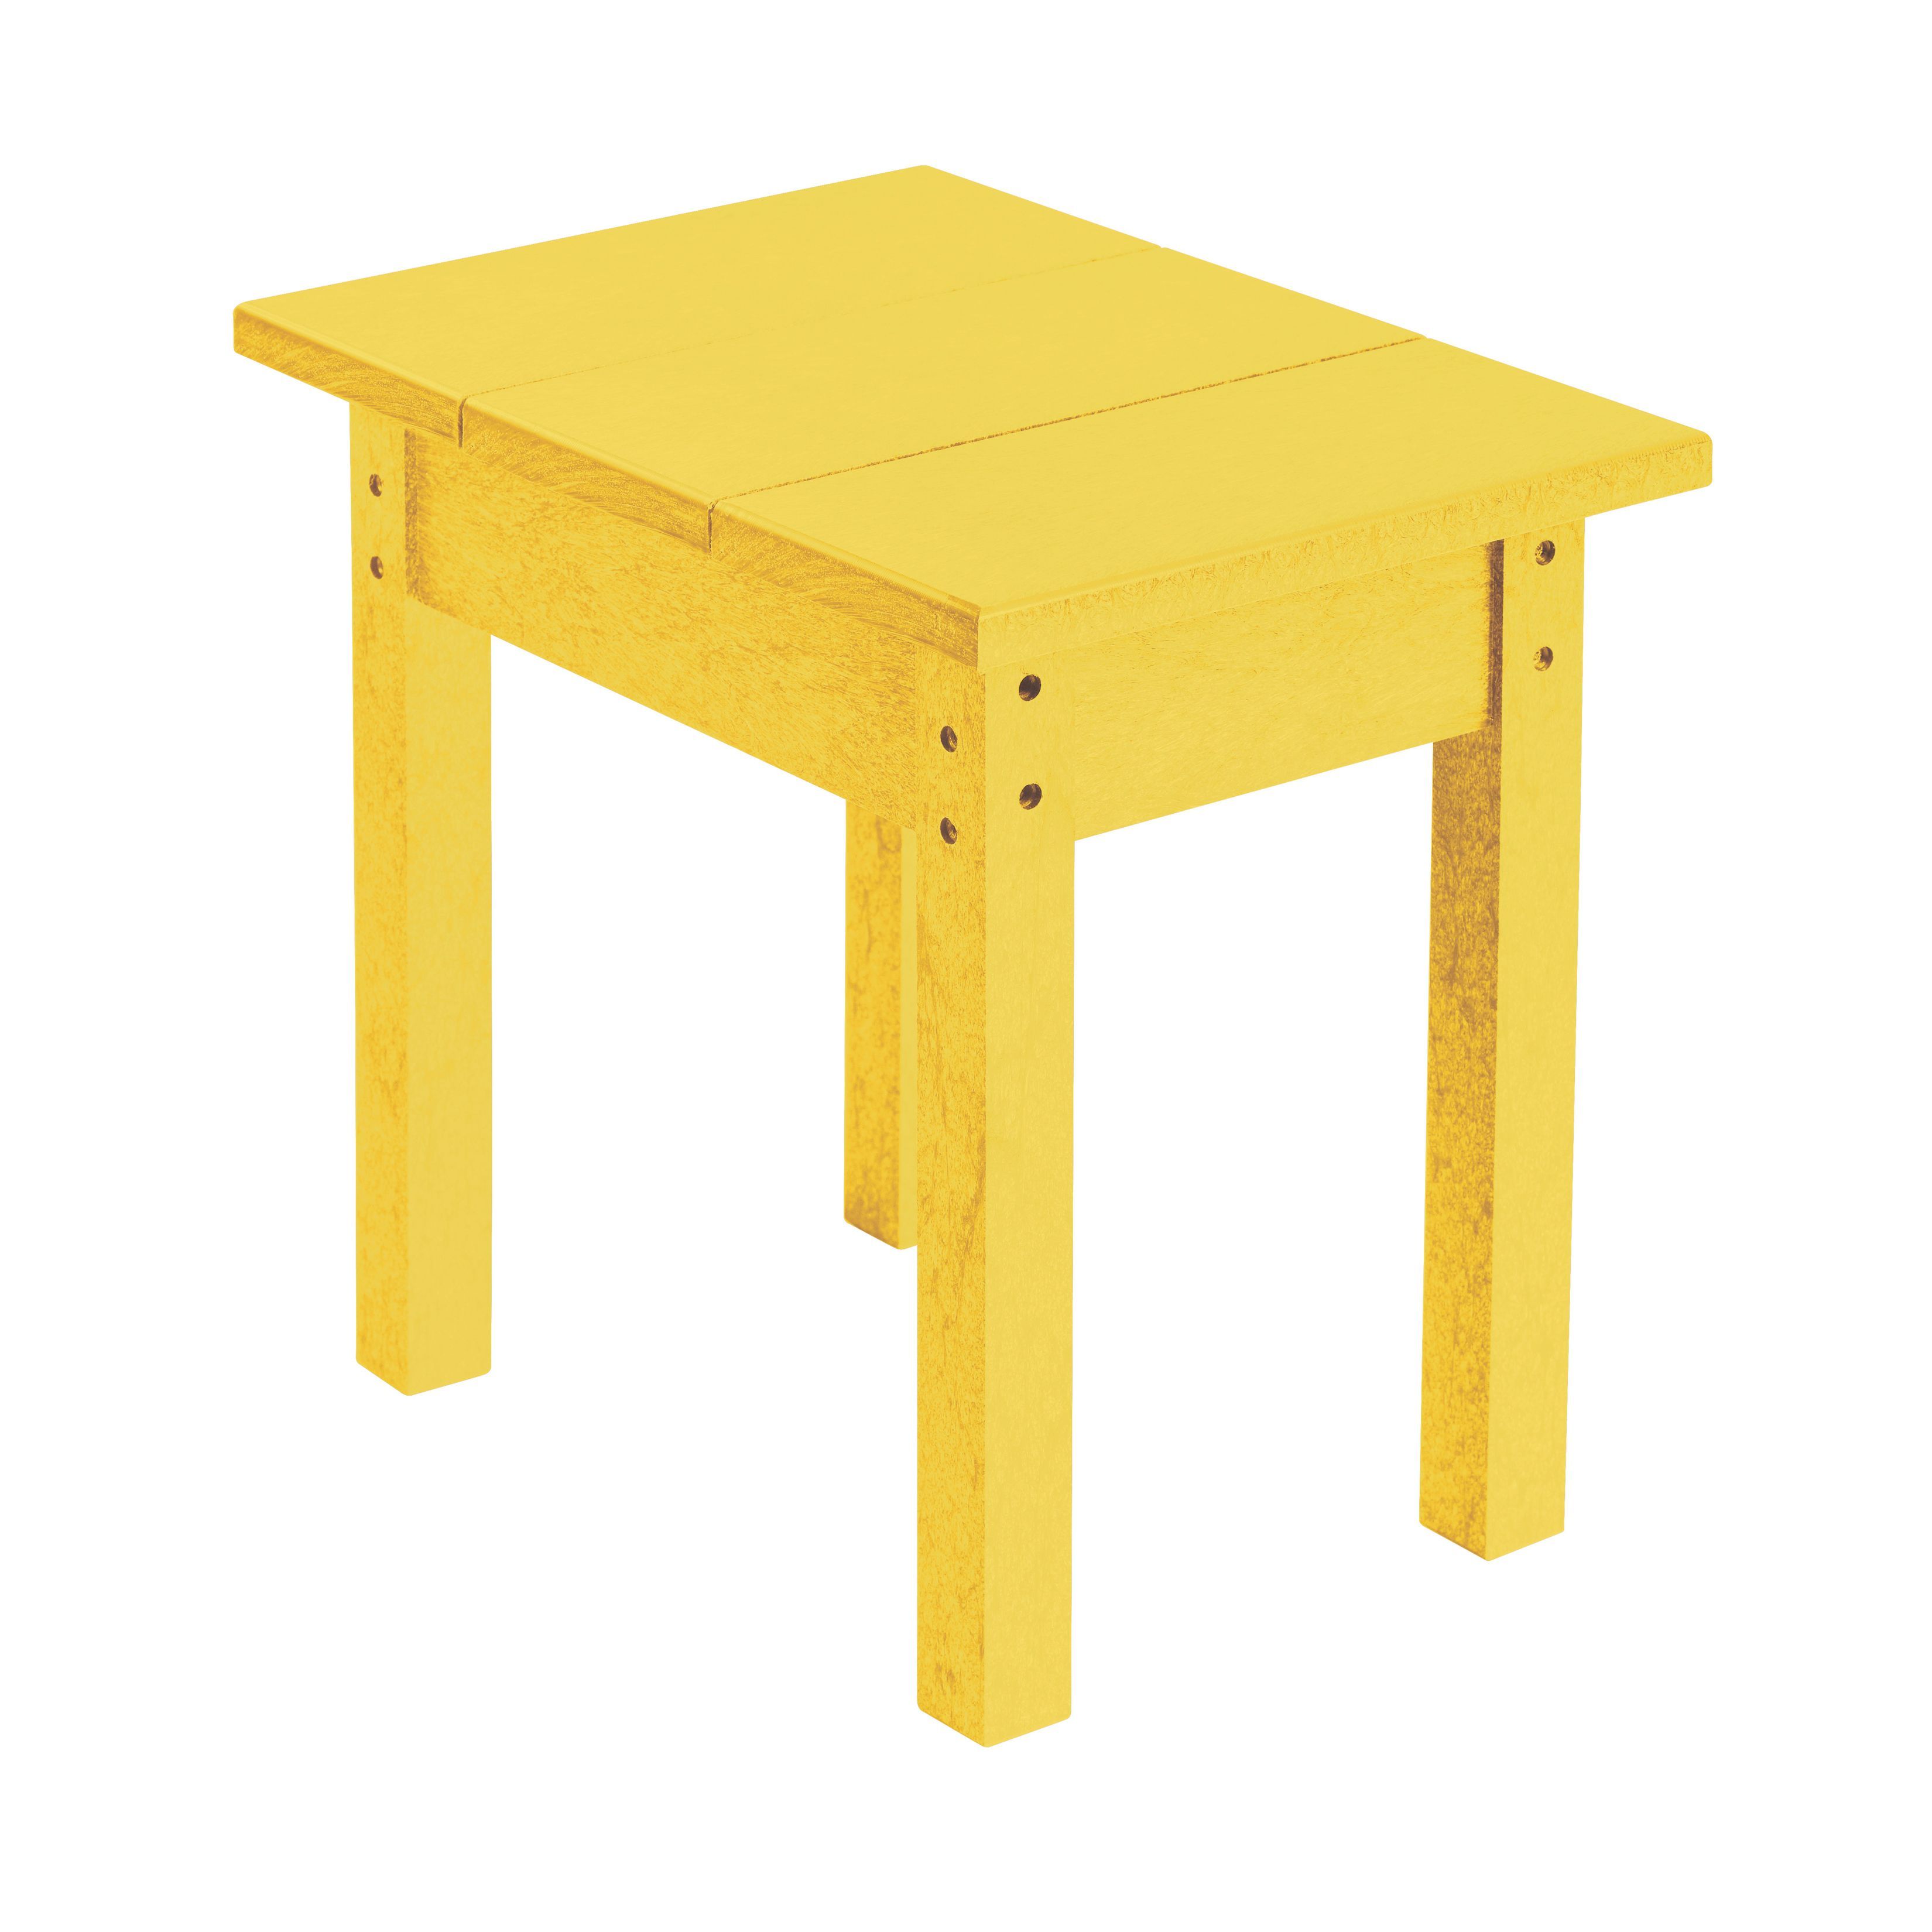 plastic products generations yellow small side table patio outdoor furniture tall kitchen chairs ashley company steamer trunk coffee rain drum modern style reclaimed wood round